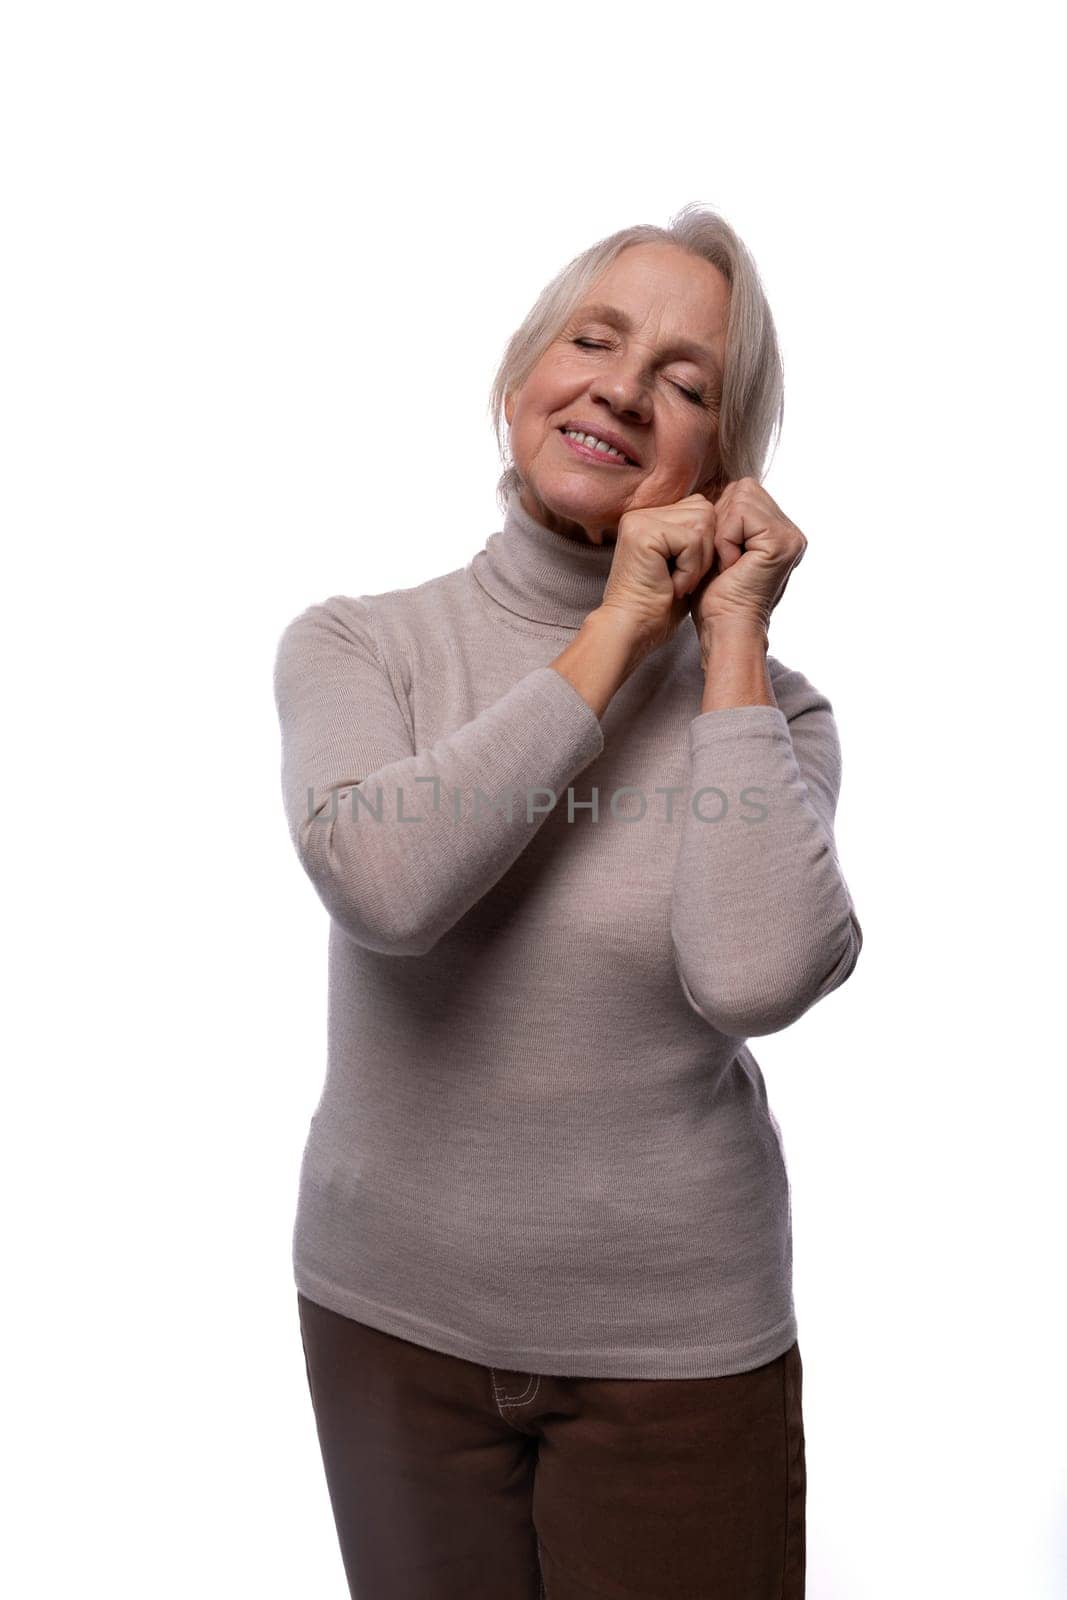 Elderly kind woman with gray hair on a white background.